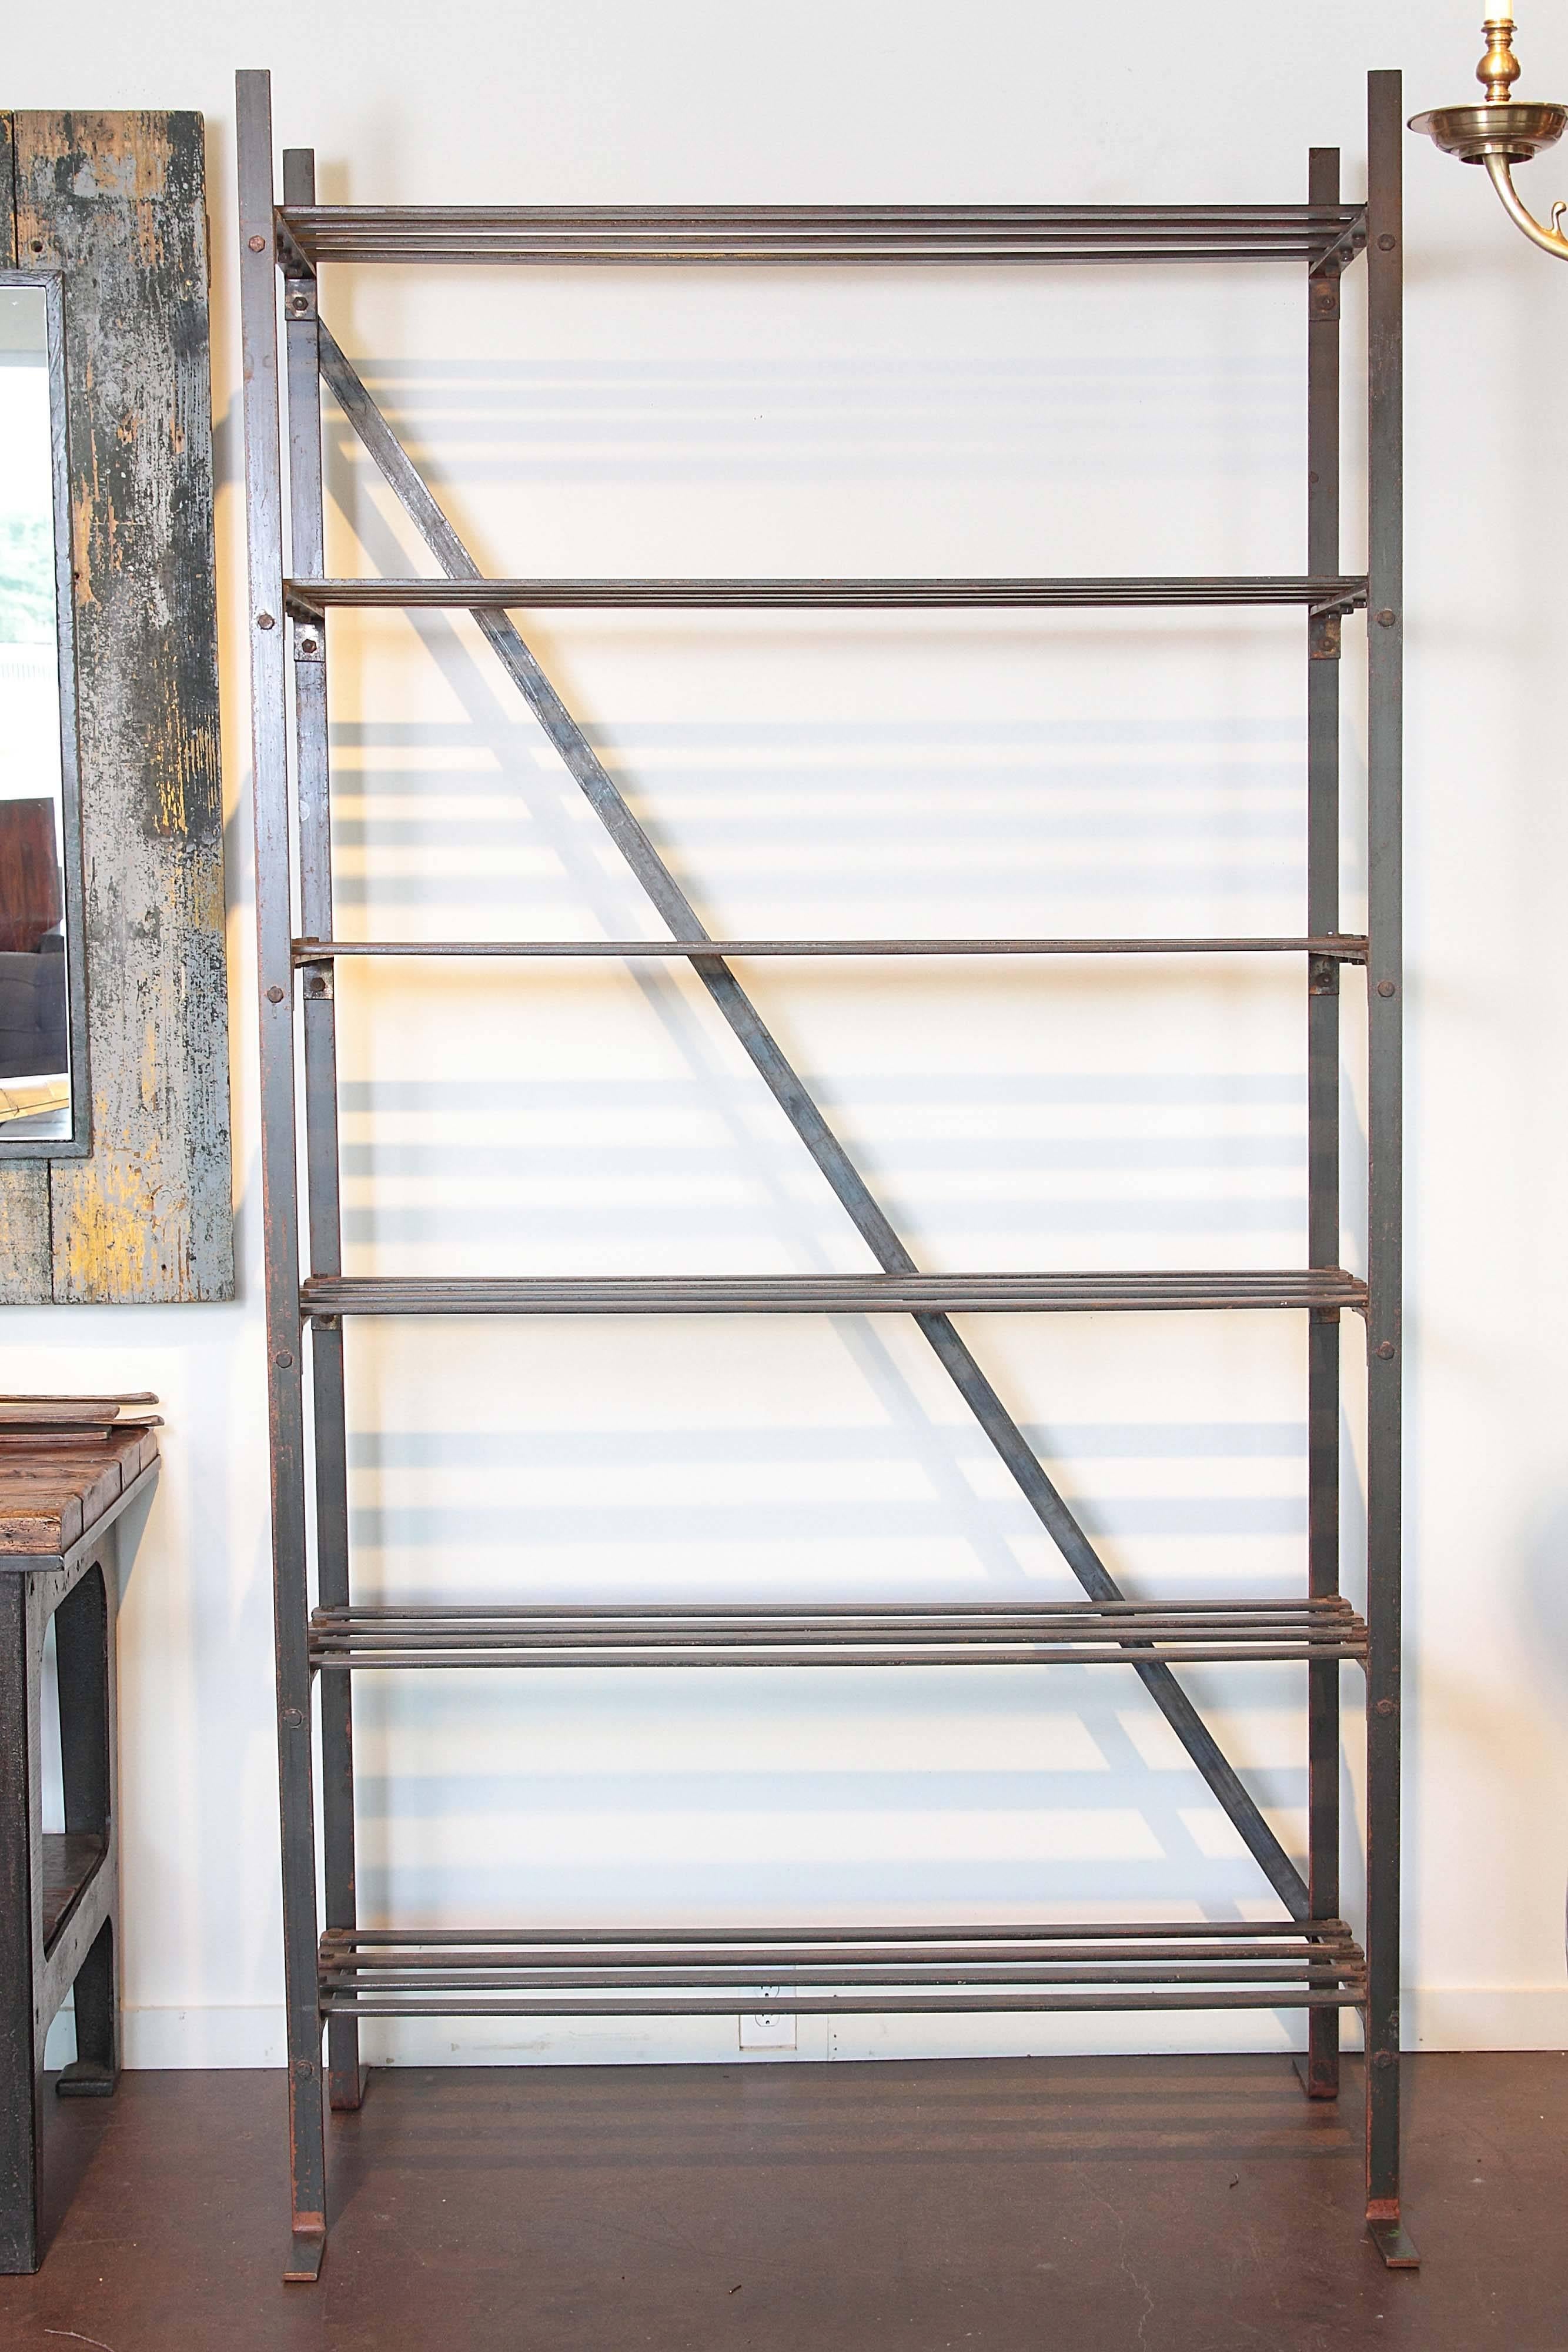 French Industrial textile etagere.
Open shelves of cast iron with industrial bolts and iron base with rust patina.

